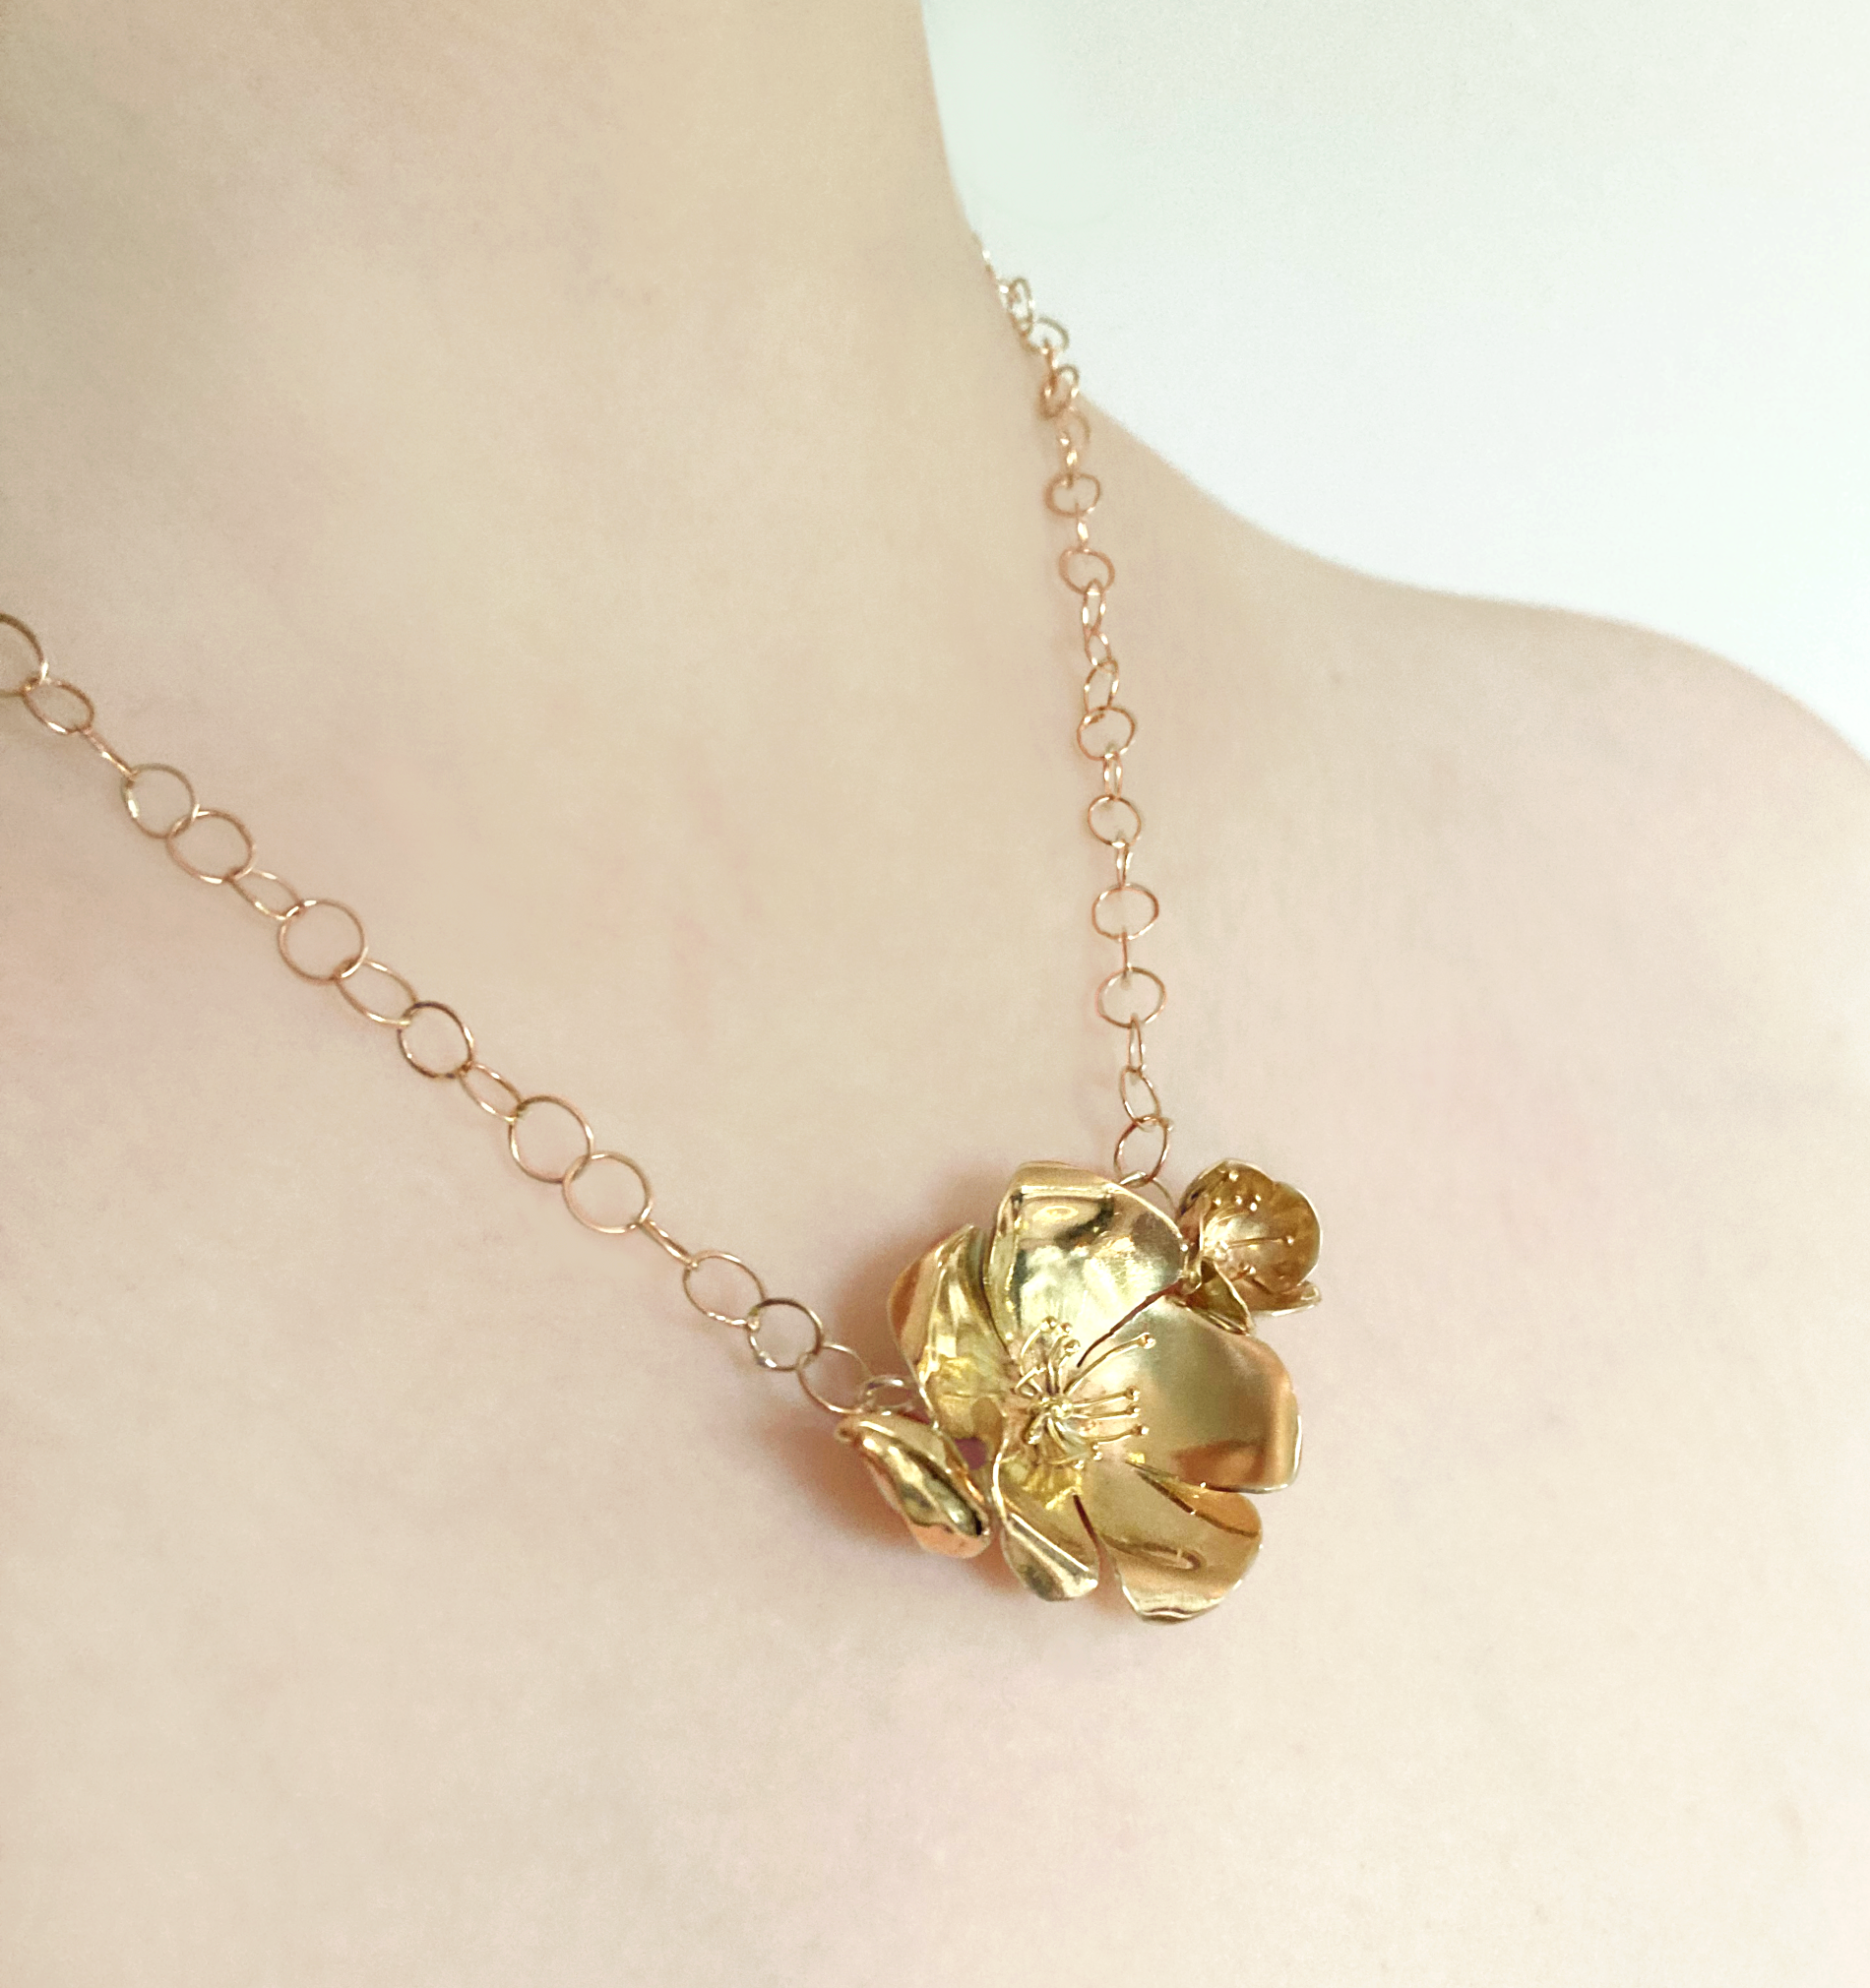 woman's neck wearing statement gold rose necklace and large link chain